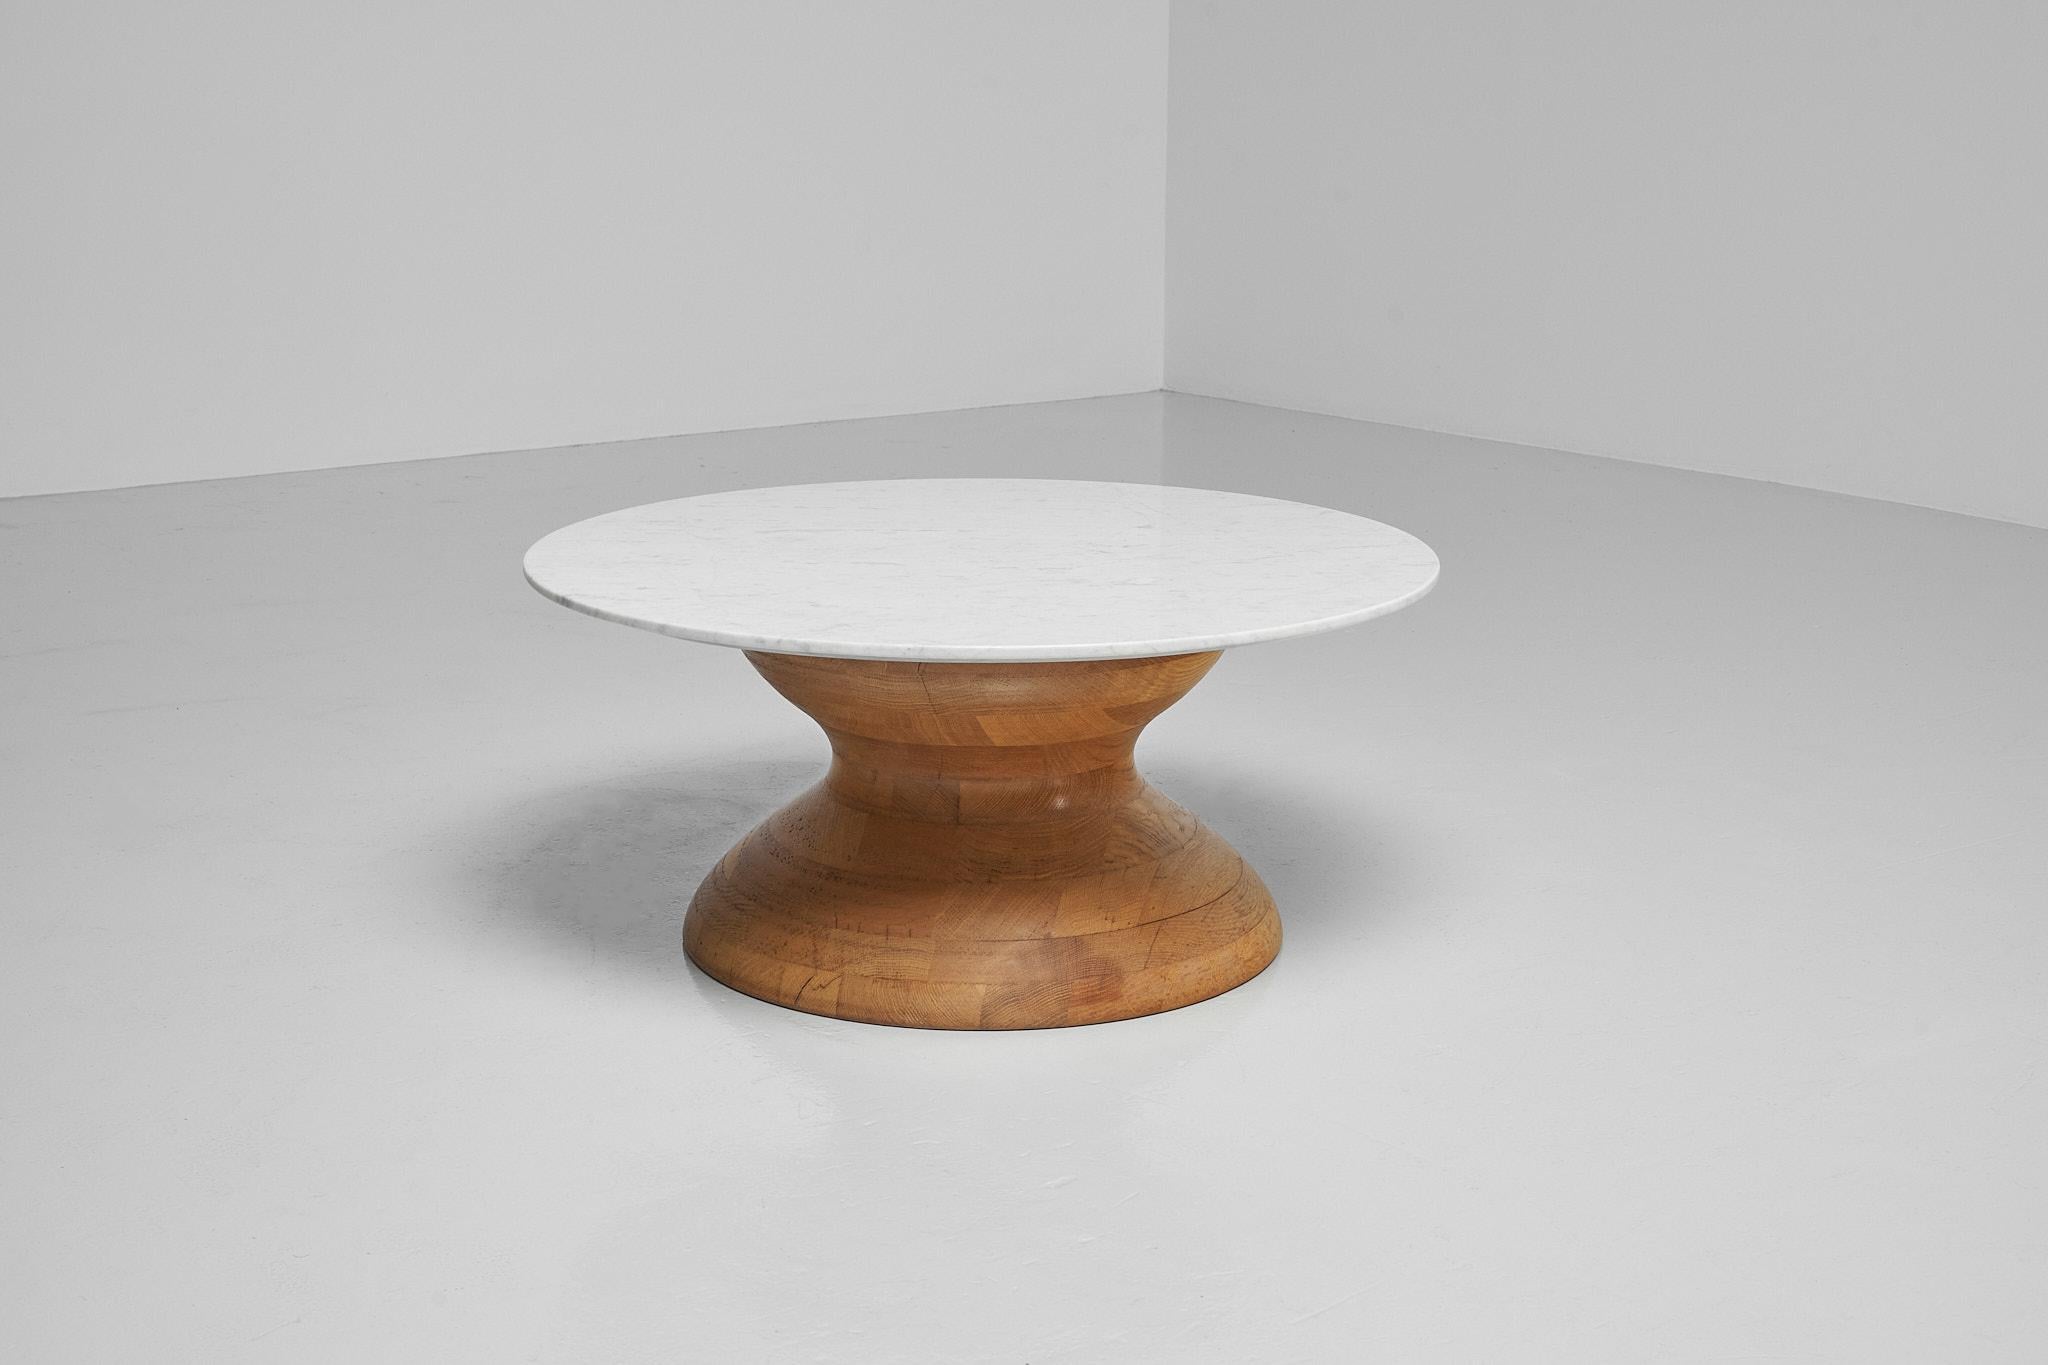 Amazing brutalist shaped coffee table made in France 1960s. Tis stunning sculpted, diabolo shaped coffee table, has a solid oak base. The base consists of different parts of solid oak wood, glued together and sculpted into this beautiful diabolo